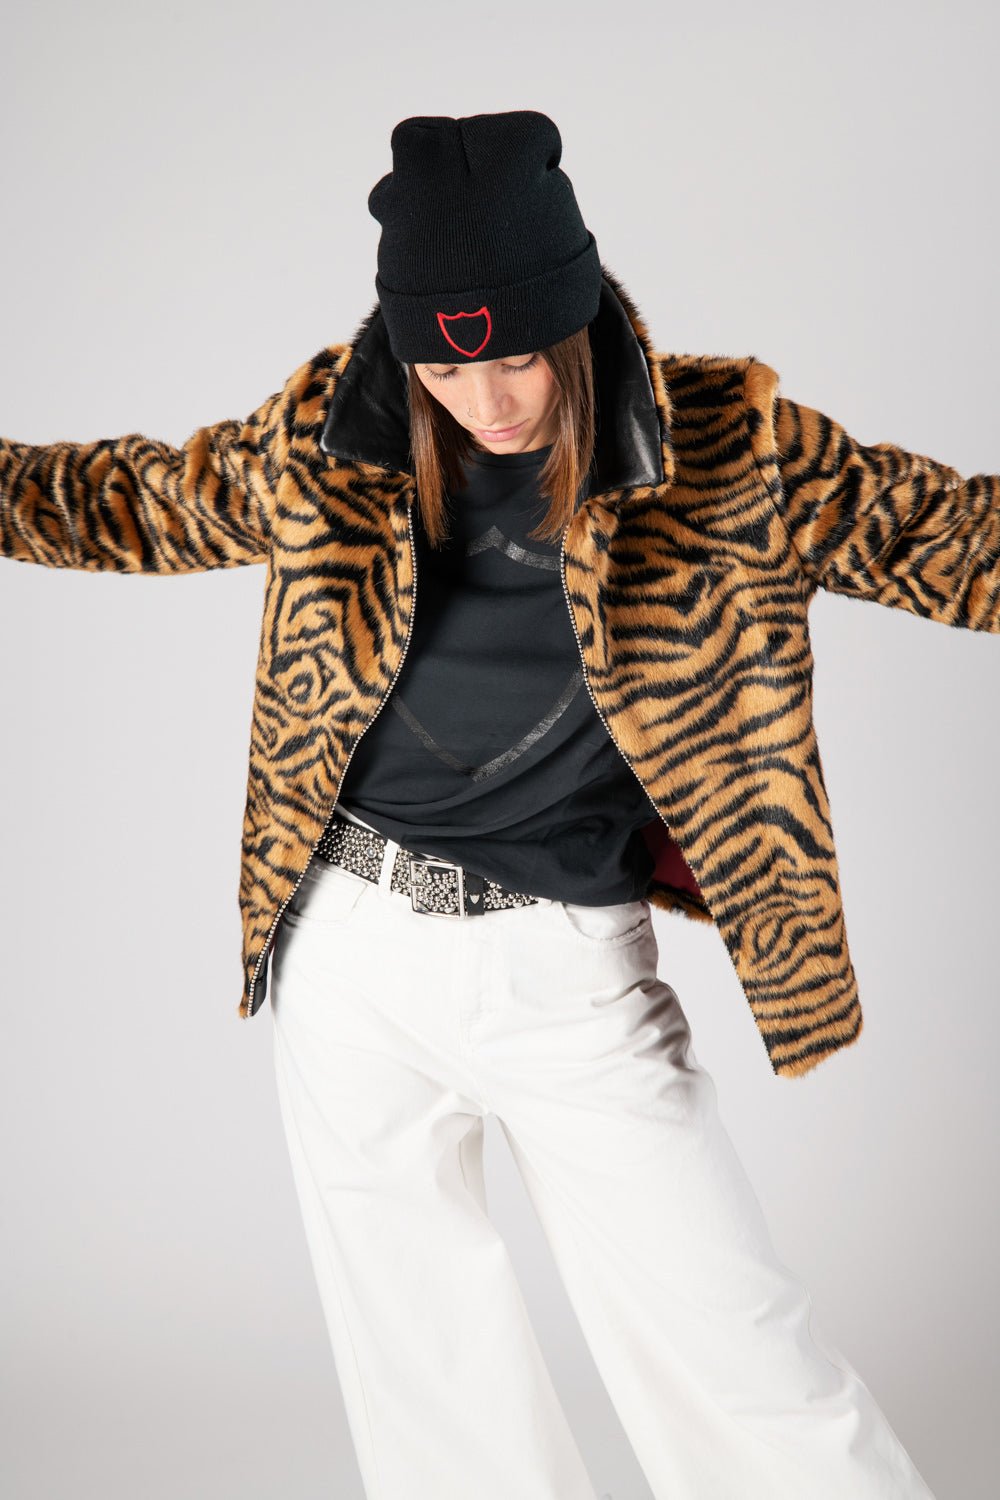 TIGER FAUX FUR BLAZER Tiger faux fur bazer, leather collar with hand-studded edge. Contrasting red lining. HTC LOS ANGELES